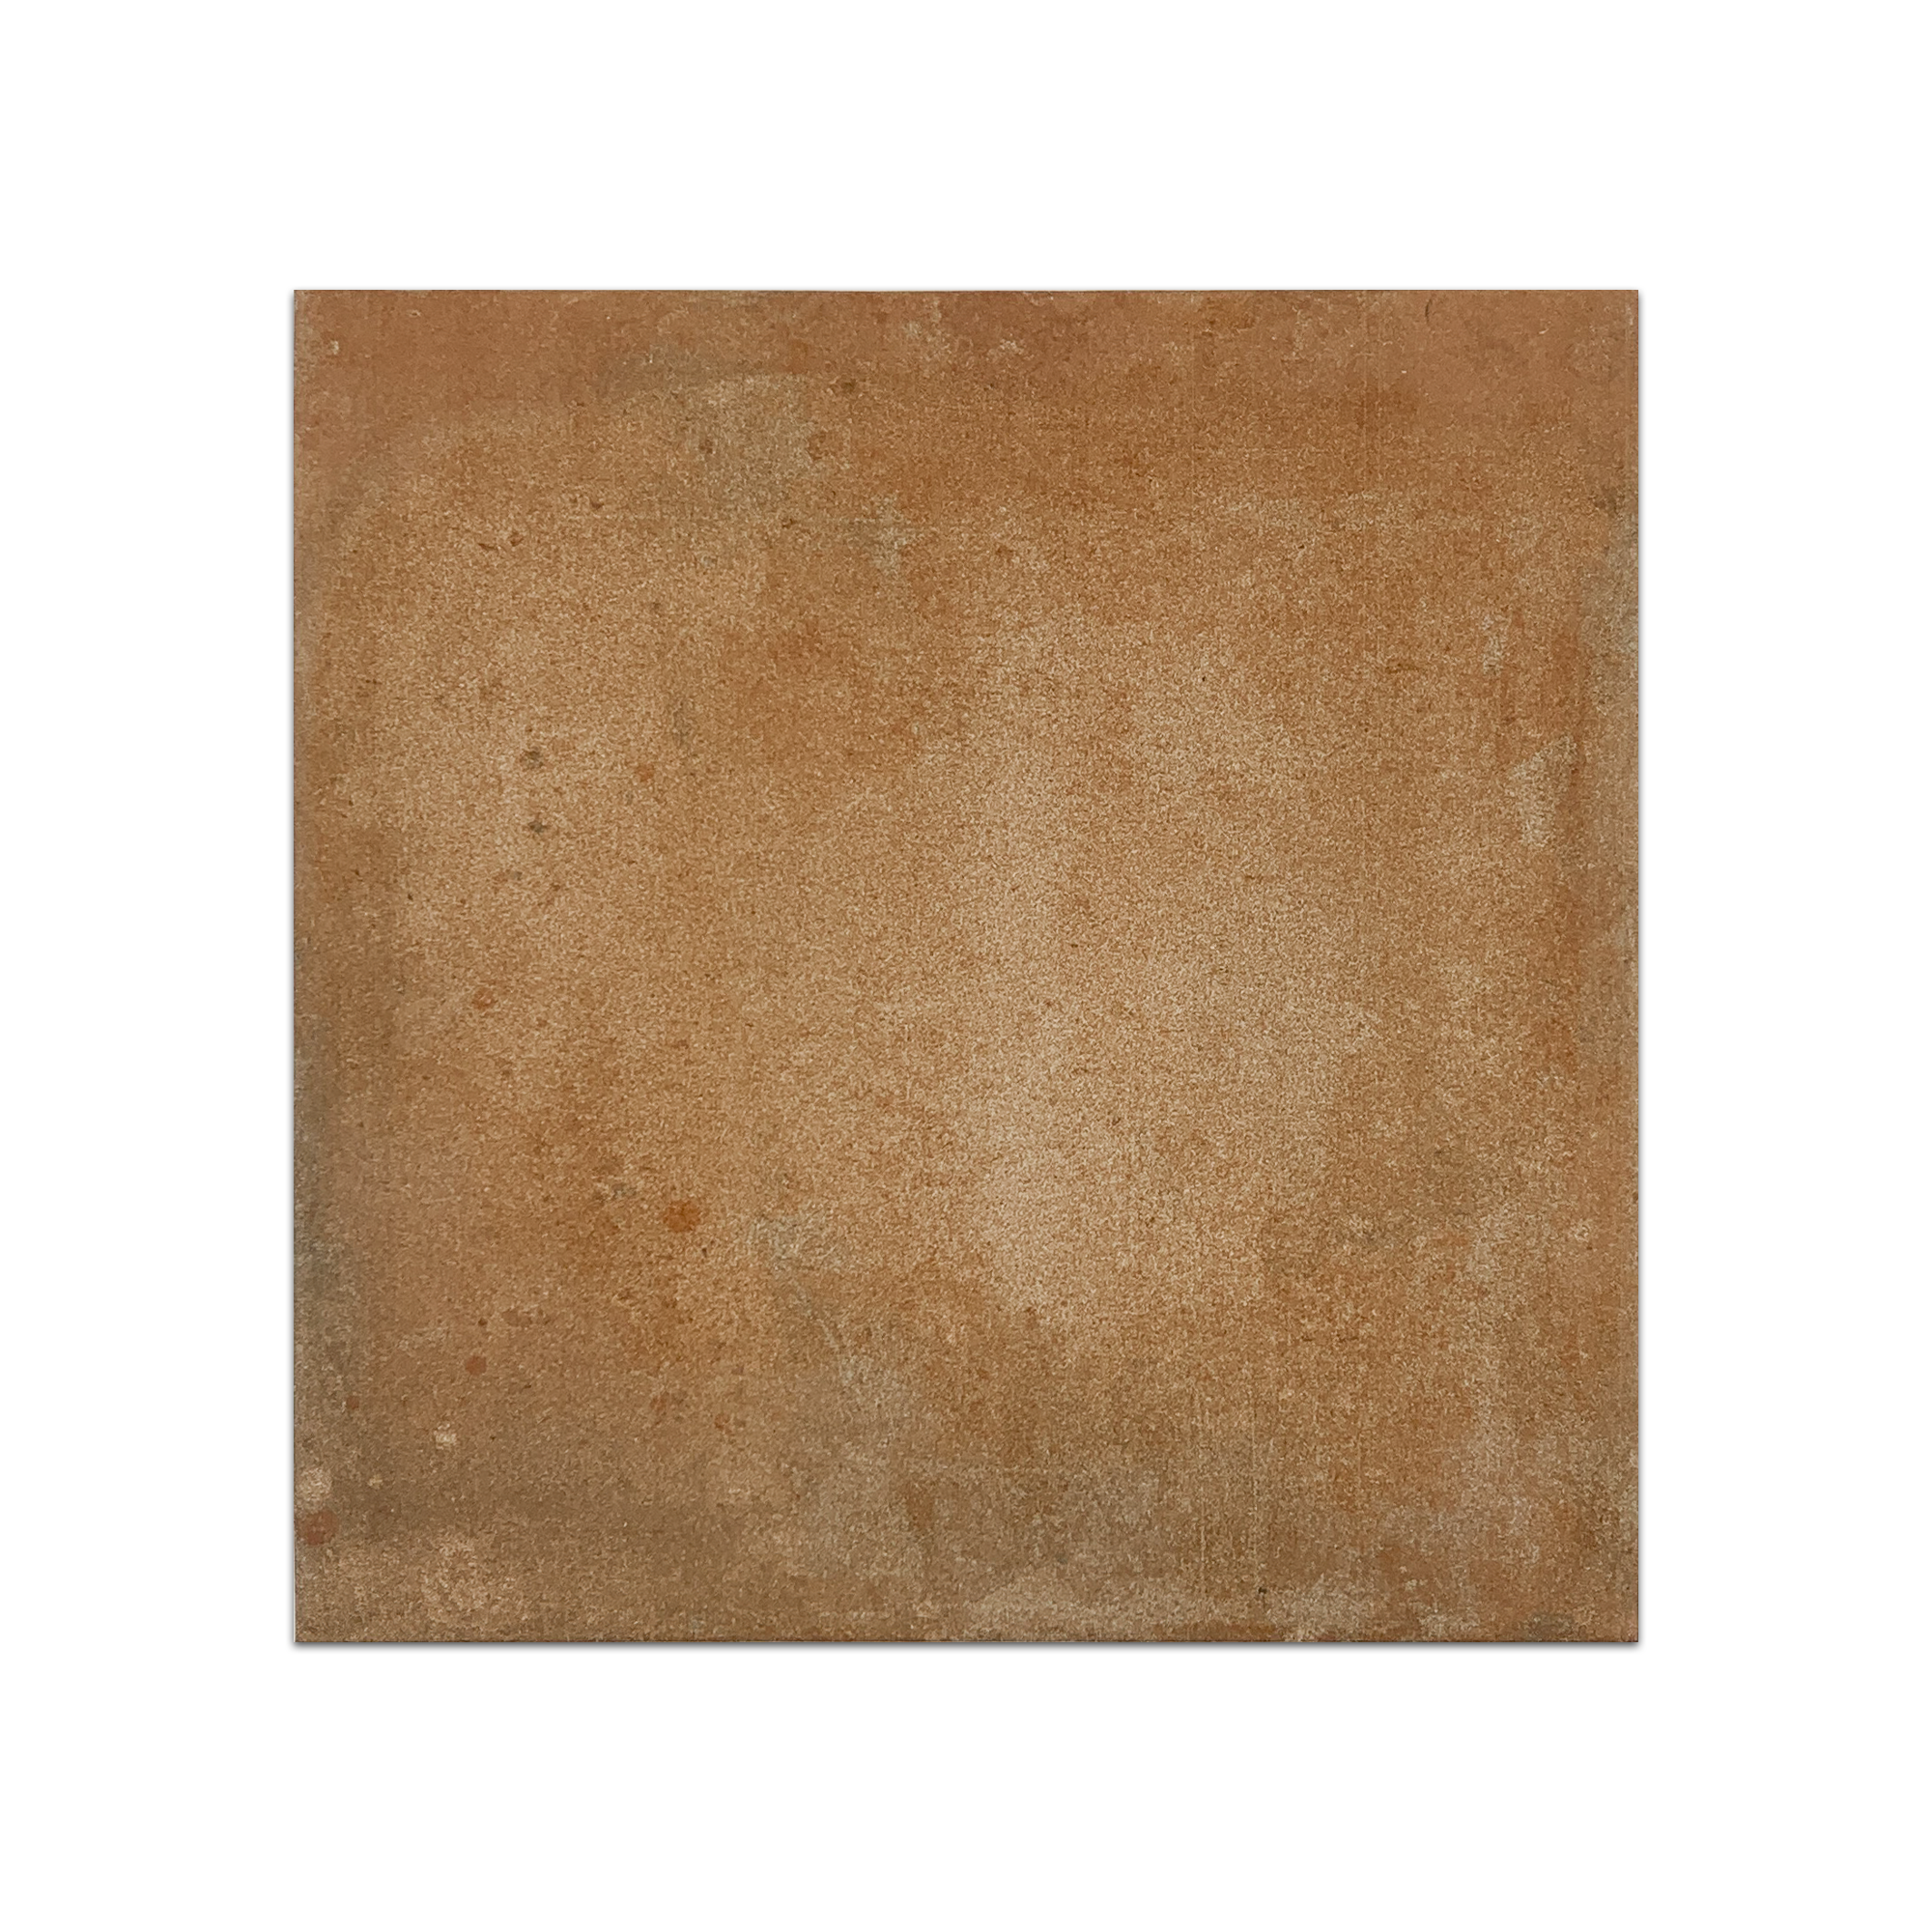 Elon Boston Brick North Porcelain Square Field Tile 14x14x0.375 Natural Pressed BC122 Surface Group International Product